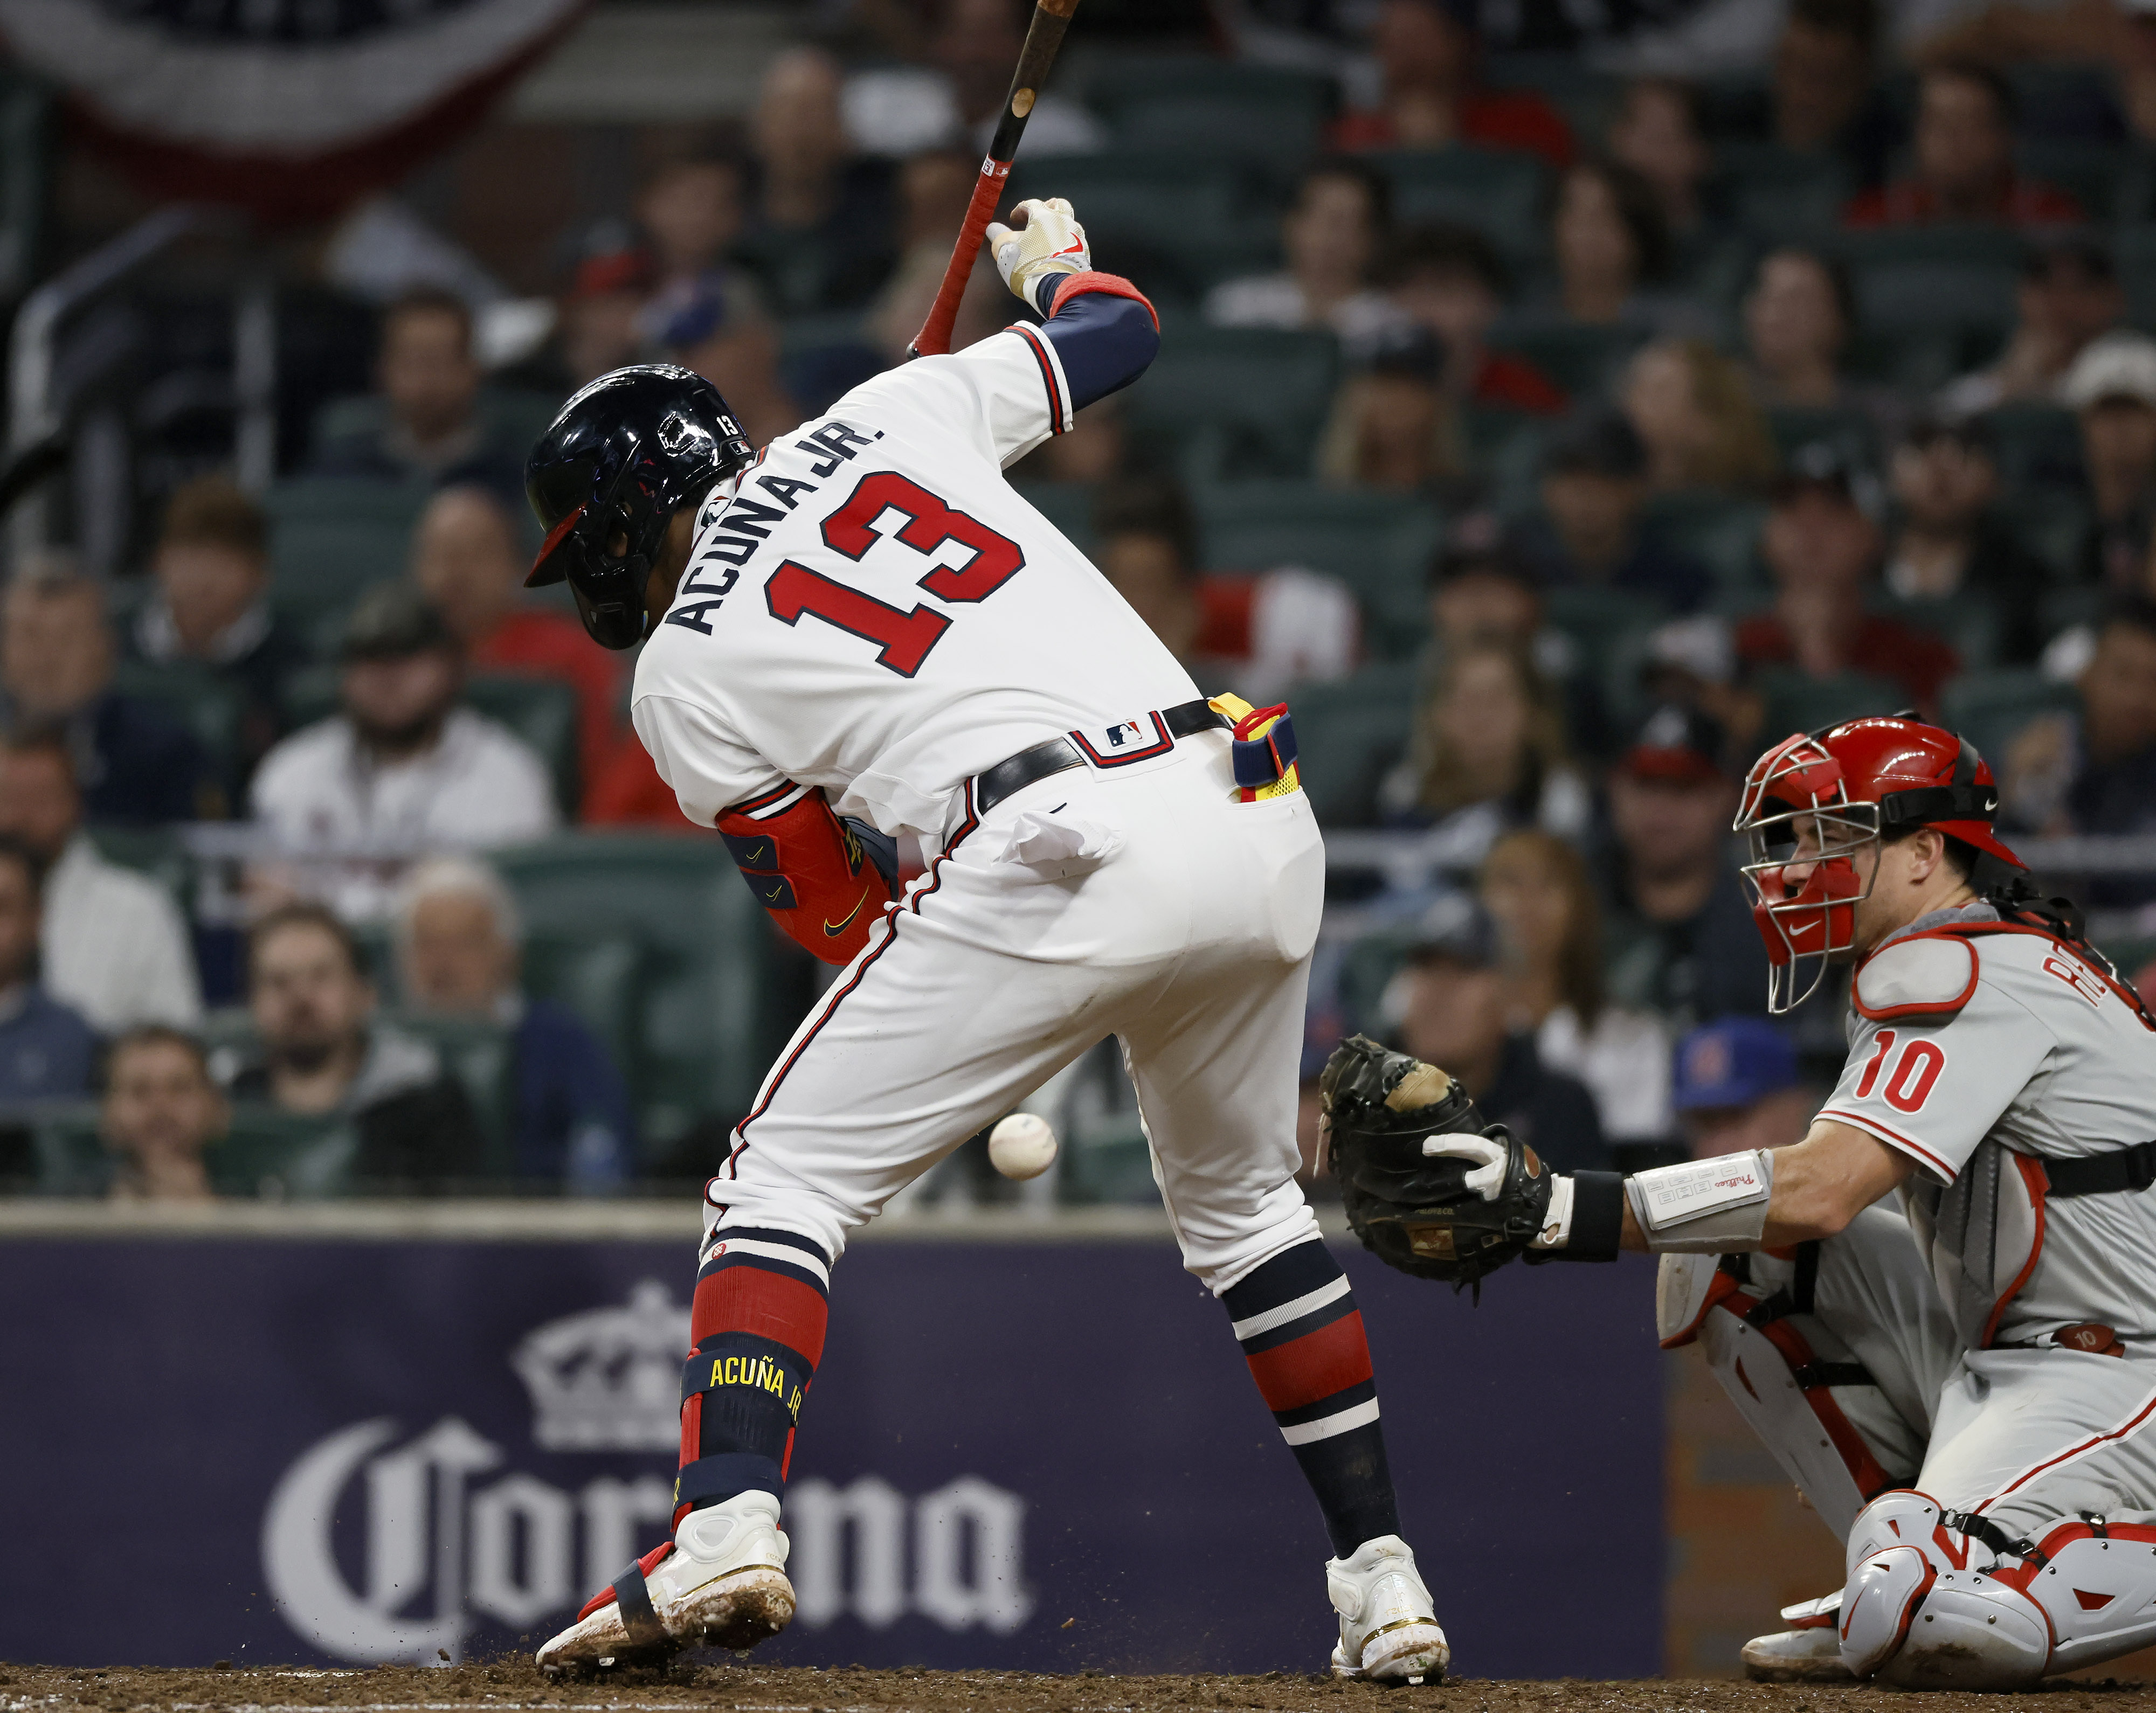 Acuña nears becoming 1st 40-60 player, homers twice on bobblehead night as  Braves beat Phillies 9-3 - The Augusta Press